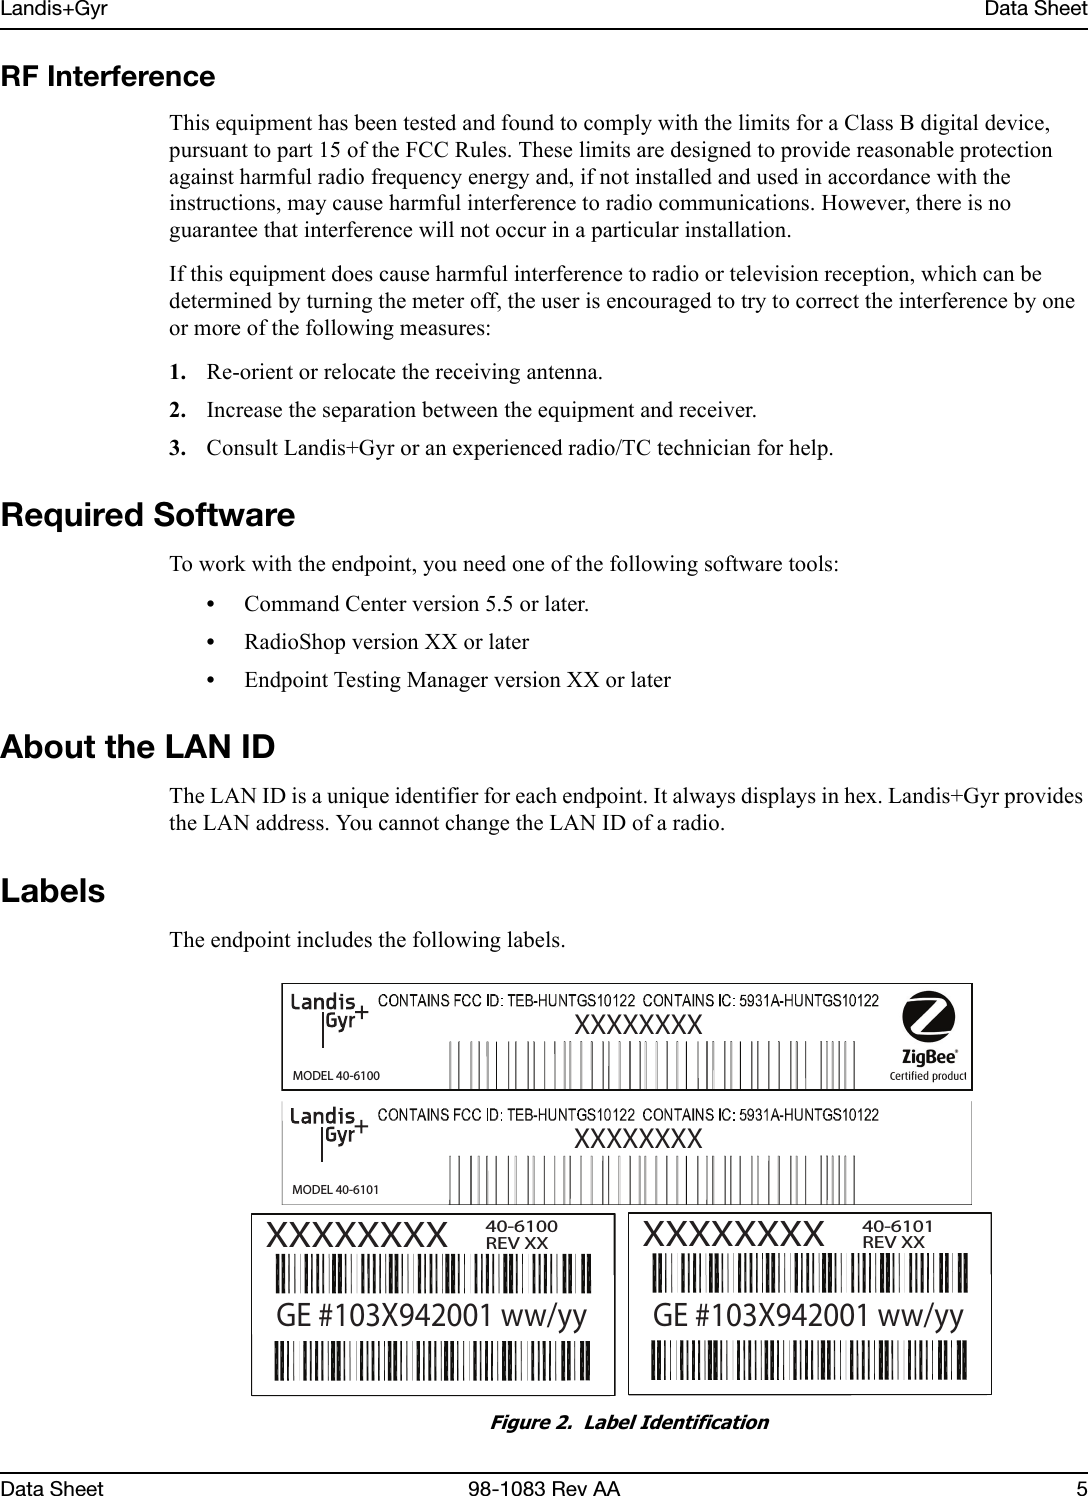 Landis+Gyr Data SheetData Sheet 98-1083 Rev AA 5RF InterferenceThis equipment has been tested and found to comply with the limits for a Class B digital device, pursuant to part 15 of the FCC Rules. These limits are designed to provide reasonable protection against harmful radio frequency energy and, if not installed and used in accordance with the instructions, may cause harmful interference to radio communications. However, there is no guarantee that interference will not occur in a particular installation. If this equipment does cause harmful interference to radio or television reception, which can be determined by turning the meter off, the user is encouraged to try to correct the interference by one or more of the following measures: 1. Re-orient or relocate the receiving antenna.2. Increase the separation between the equipment and receiver.3. Consult Landis+Gyr or an experienced radio/TC technician for help.Required SoftwareTo work with the endpoint, you need one of the following software tools:•Command Center version 5.5 or later.•RadioShop version XX or later•Endpoint Testing Manager version XX or laterAbout the LAN IDThe LAN ID is a unique identifier for each endpoint. It always displays in hex. Landis+Gyr provides the LAN address. You cannot change the LAN ID of a radio.LabelsThe endpoint includes the following labels.Figure 2.  Label IdentificationMODEL 40-6100XXXXXXXXXXXXXXXXGE #103X942001 ww/yy40-6100REV XXMODEL 40-6101XXXXXXXXXXXXXXXXGE #103X942001 ww/yy40-6101REV XX